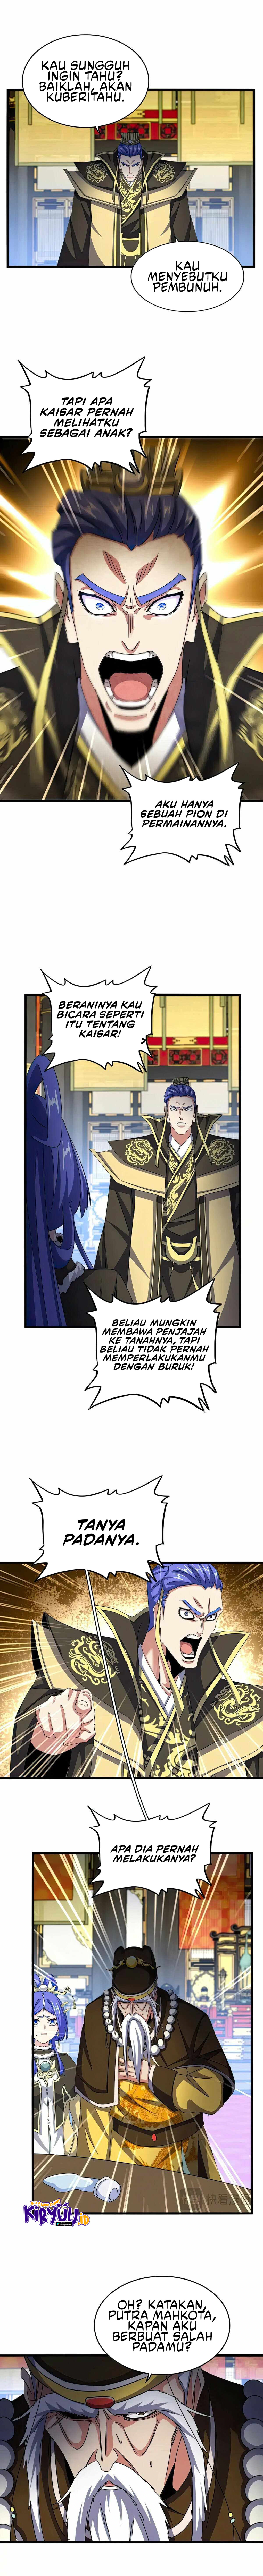 Magic Emperor Chapter 529 Image 3